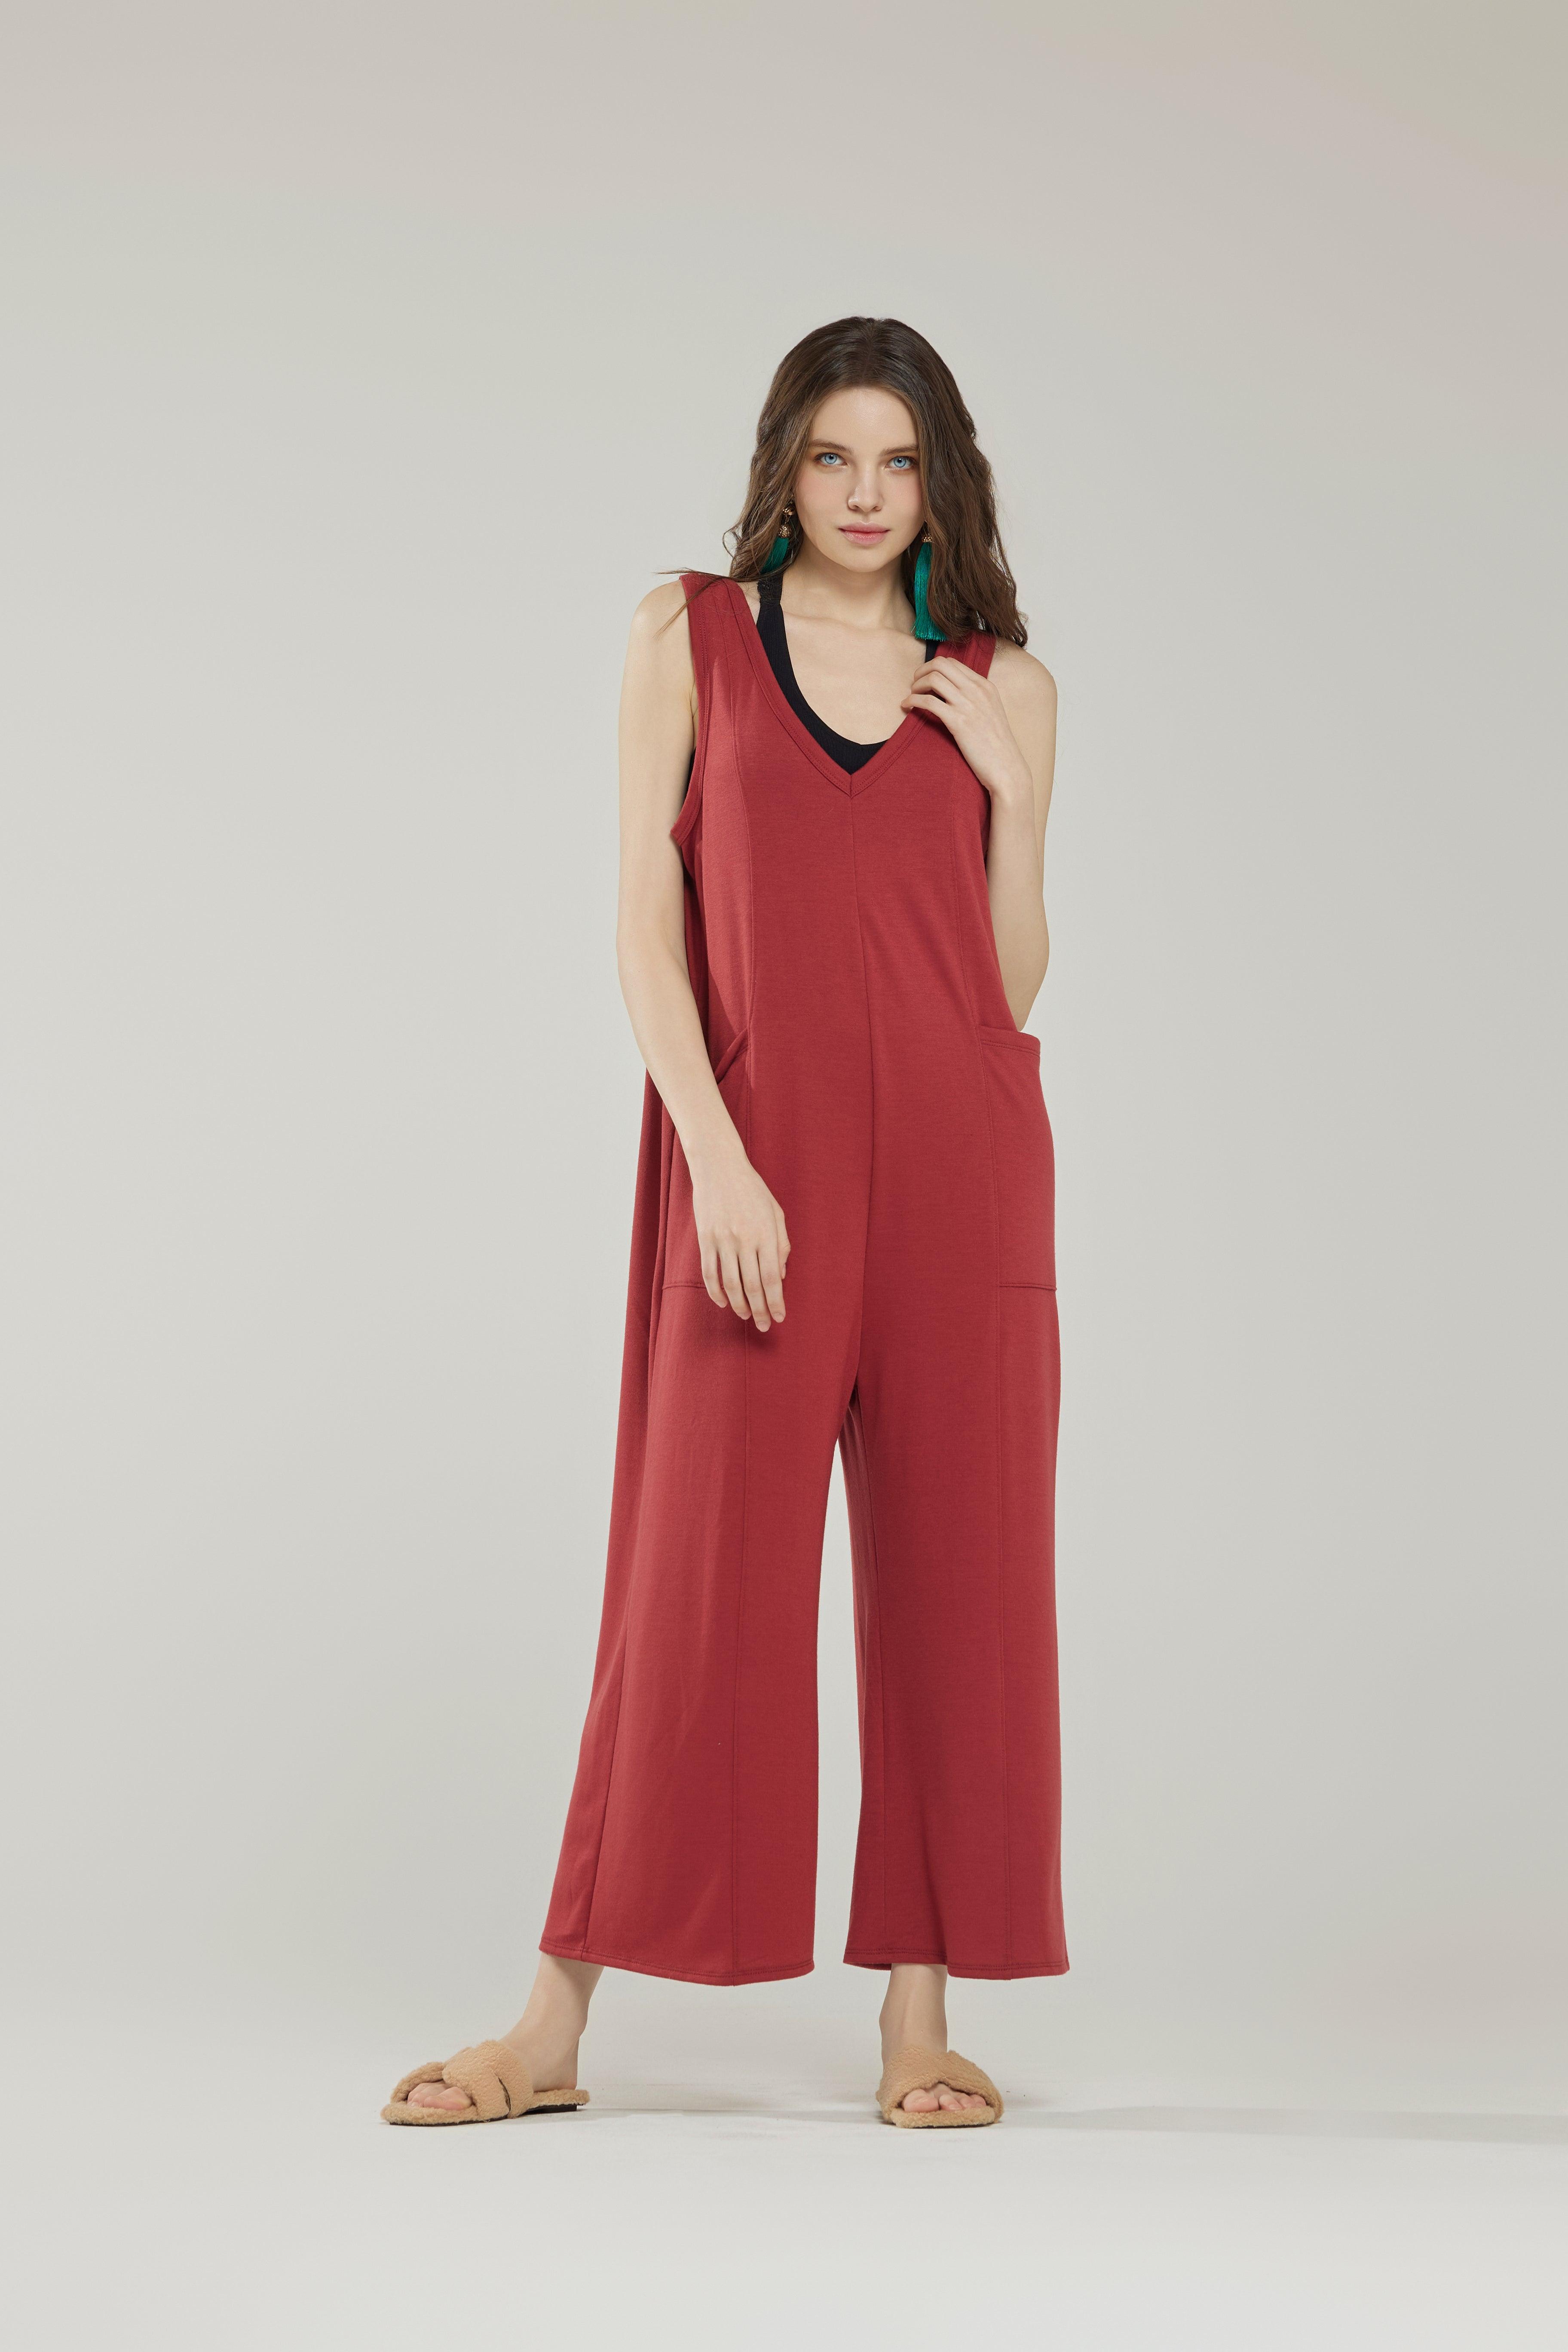 Casual Boho Sleeveless Jumpsuits with Pockets Loose Relaxed Fit